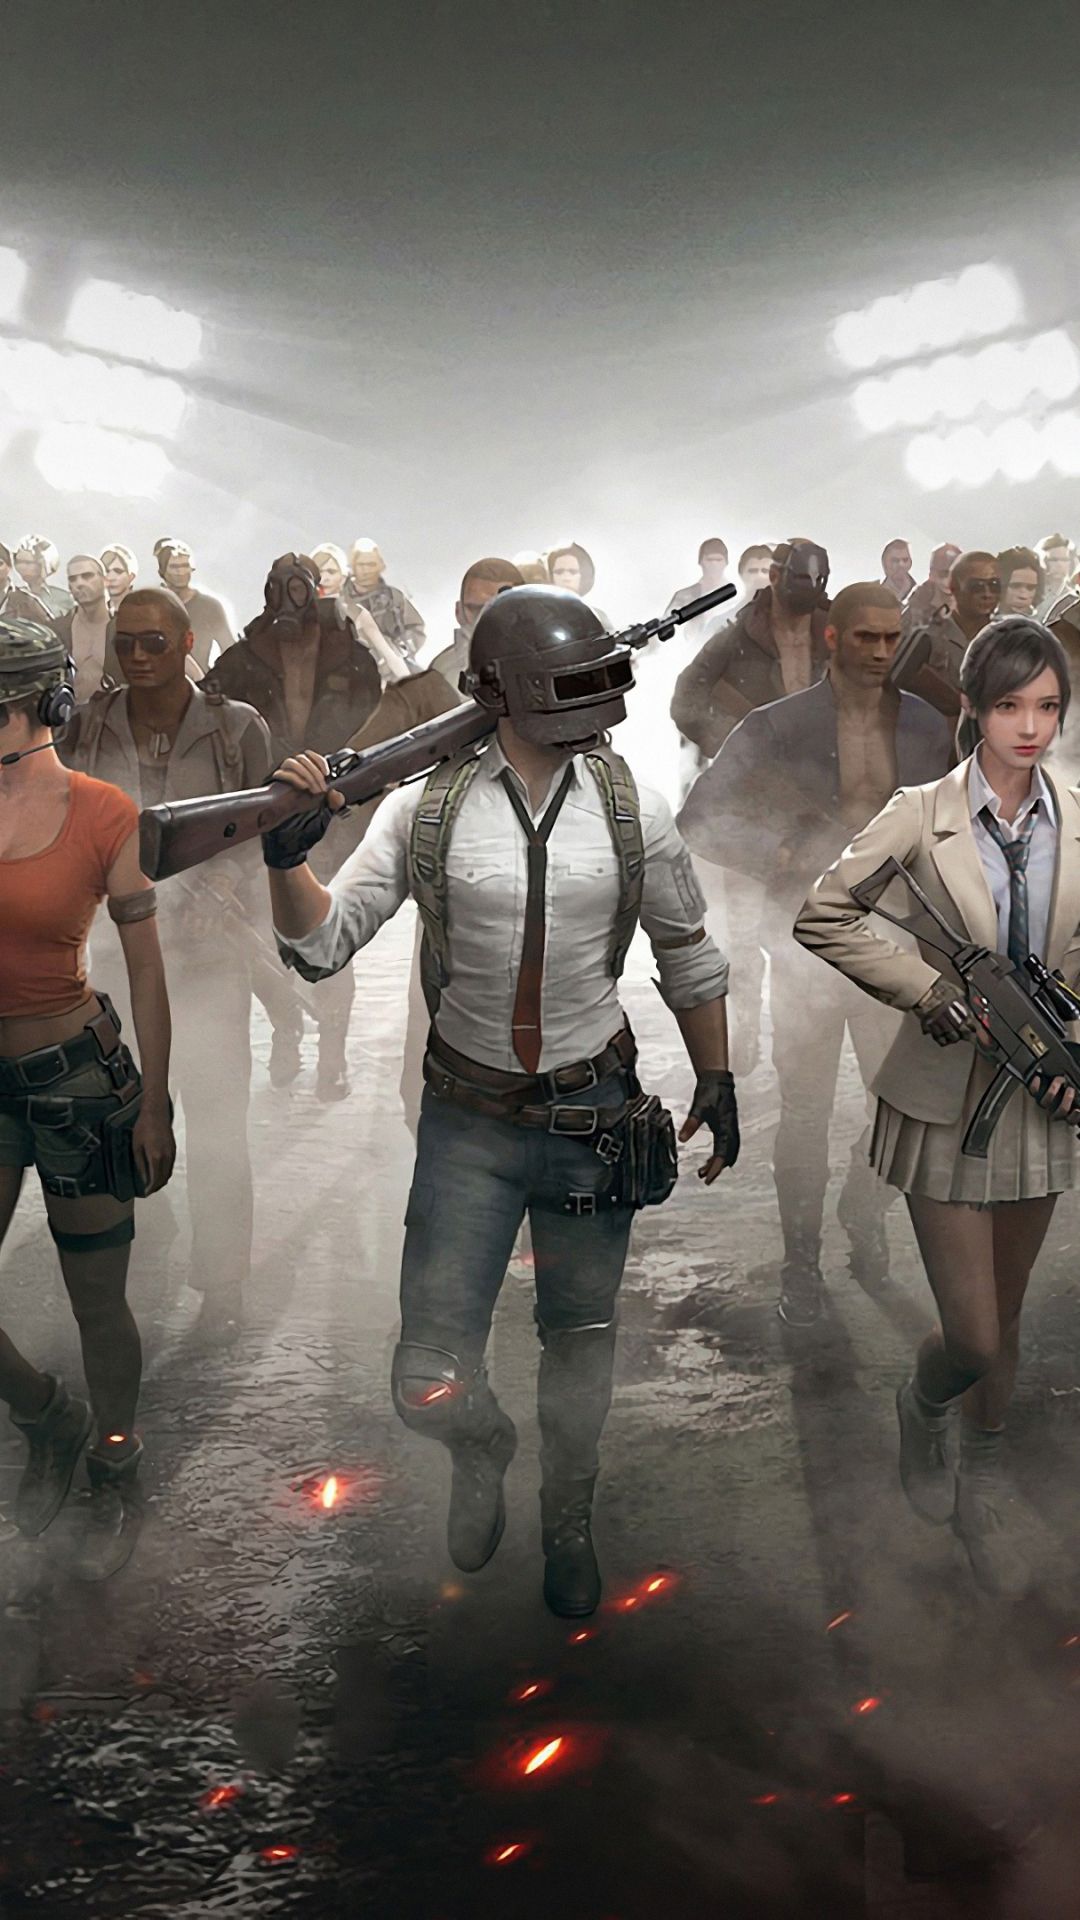 Free download Pubg Characters 4k HD Games 4k Wallpaper Image Background [3840x2160] for your Desktop, Mobile & Tablet. Explore PUBG 4K Wallpaper. PUBG 4K Wallpaper, PUBG Mobile 4k Wallpaper, Pubg Wallpaper